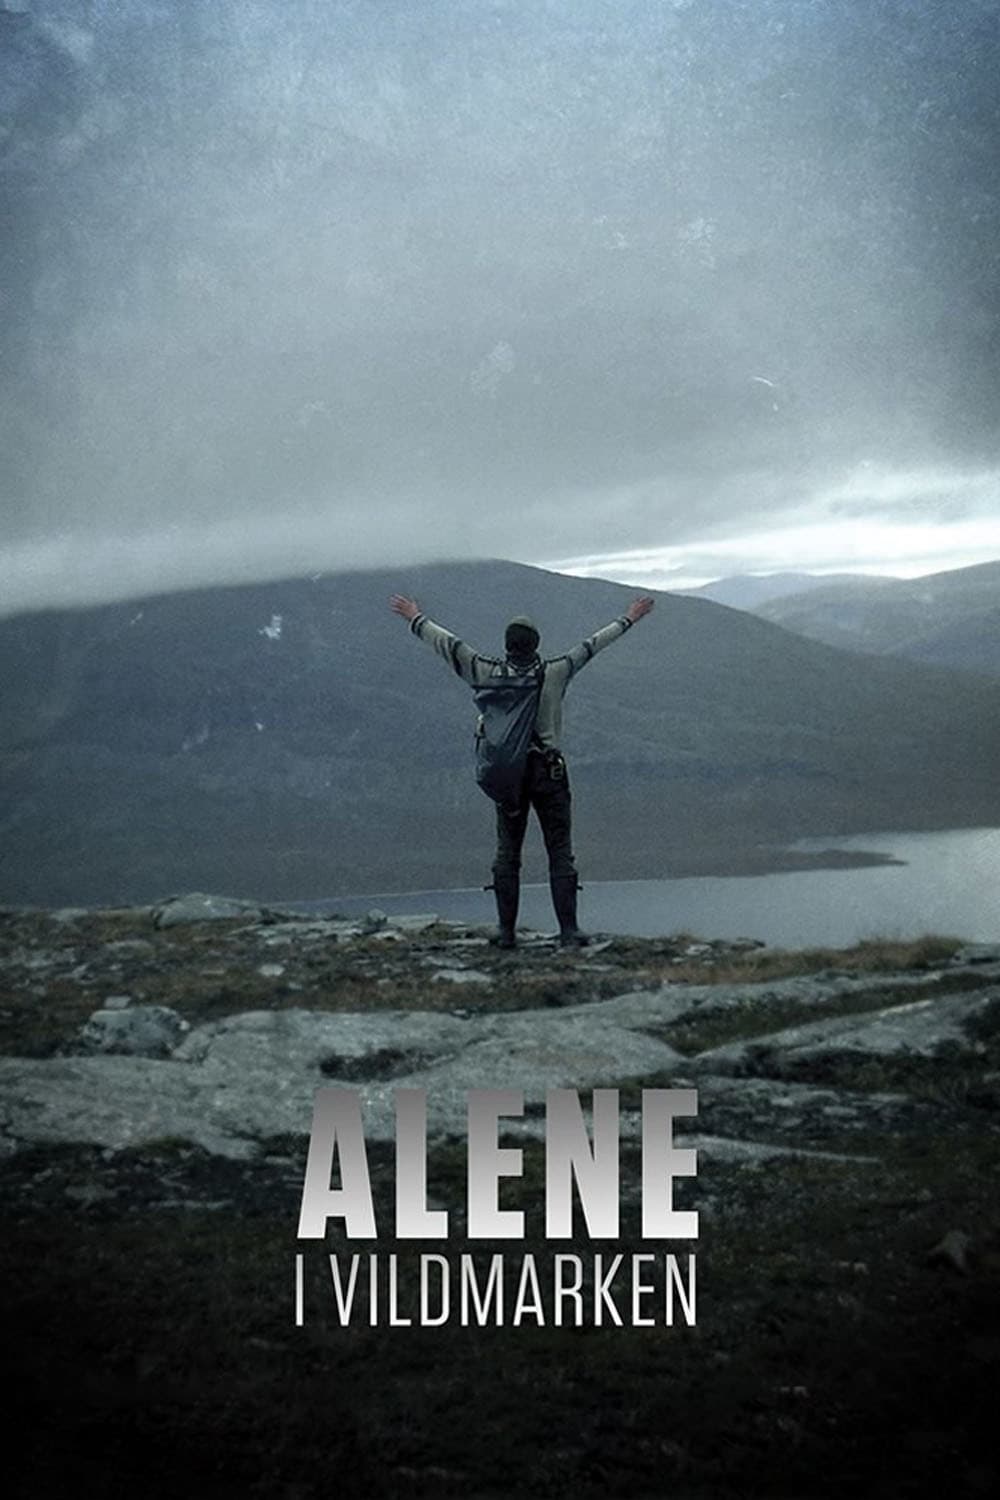 Alone in the Wilderness (2017)